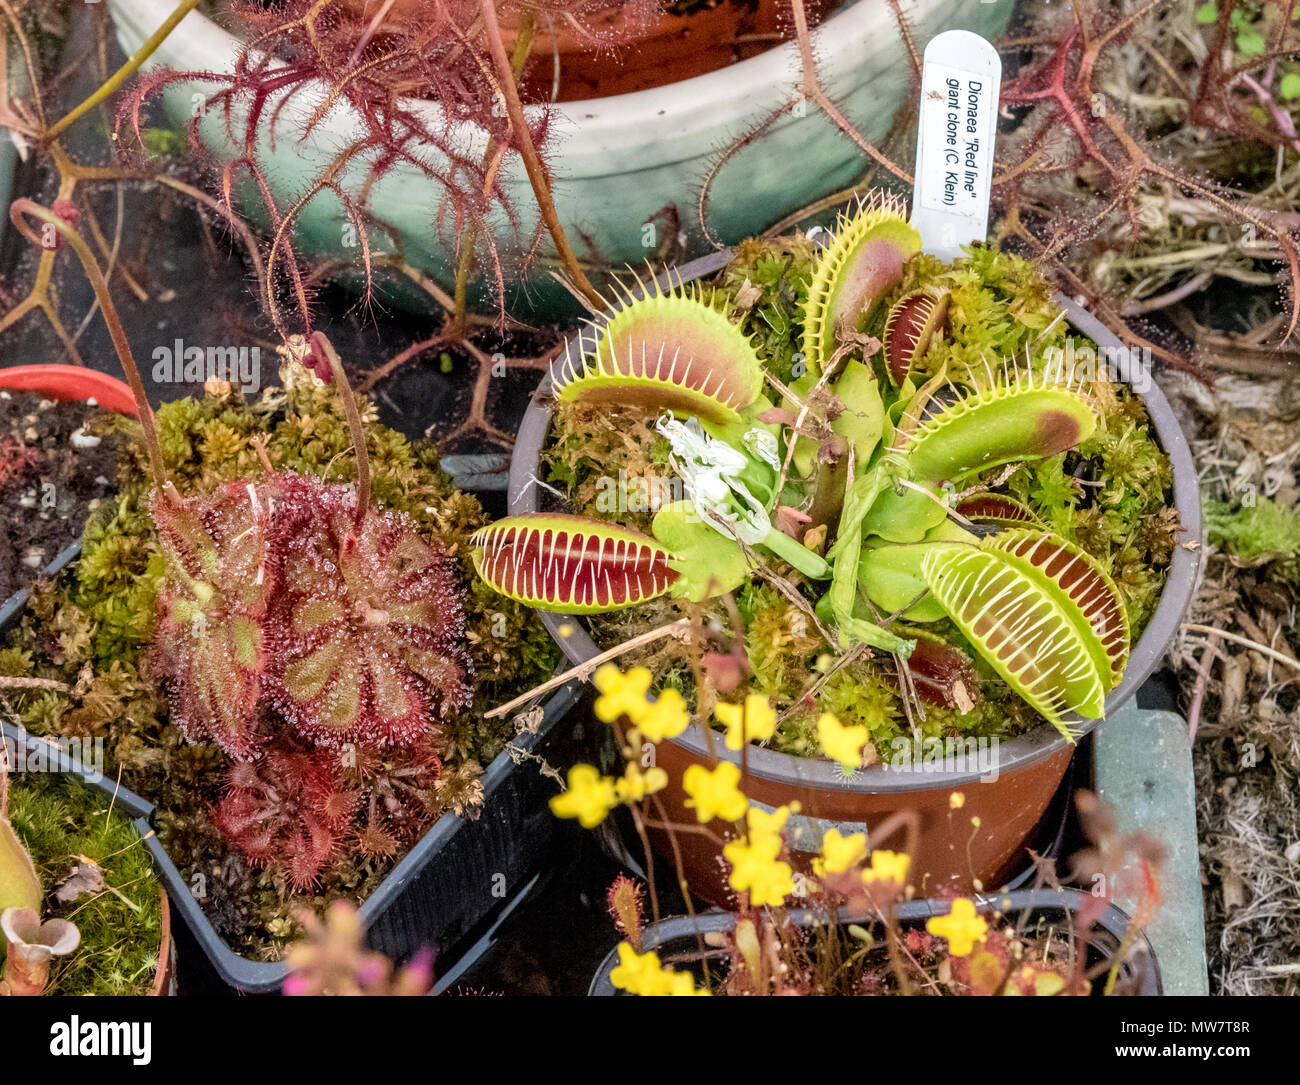 Venus fly trap, Flower competition, Madeira Flower Festival Stock Photo